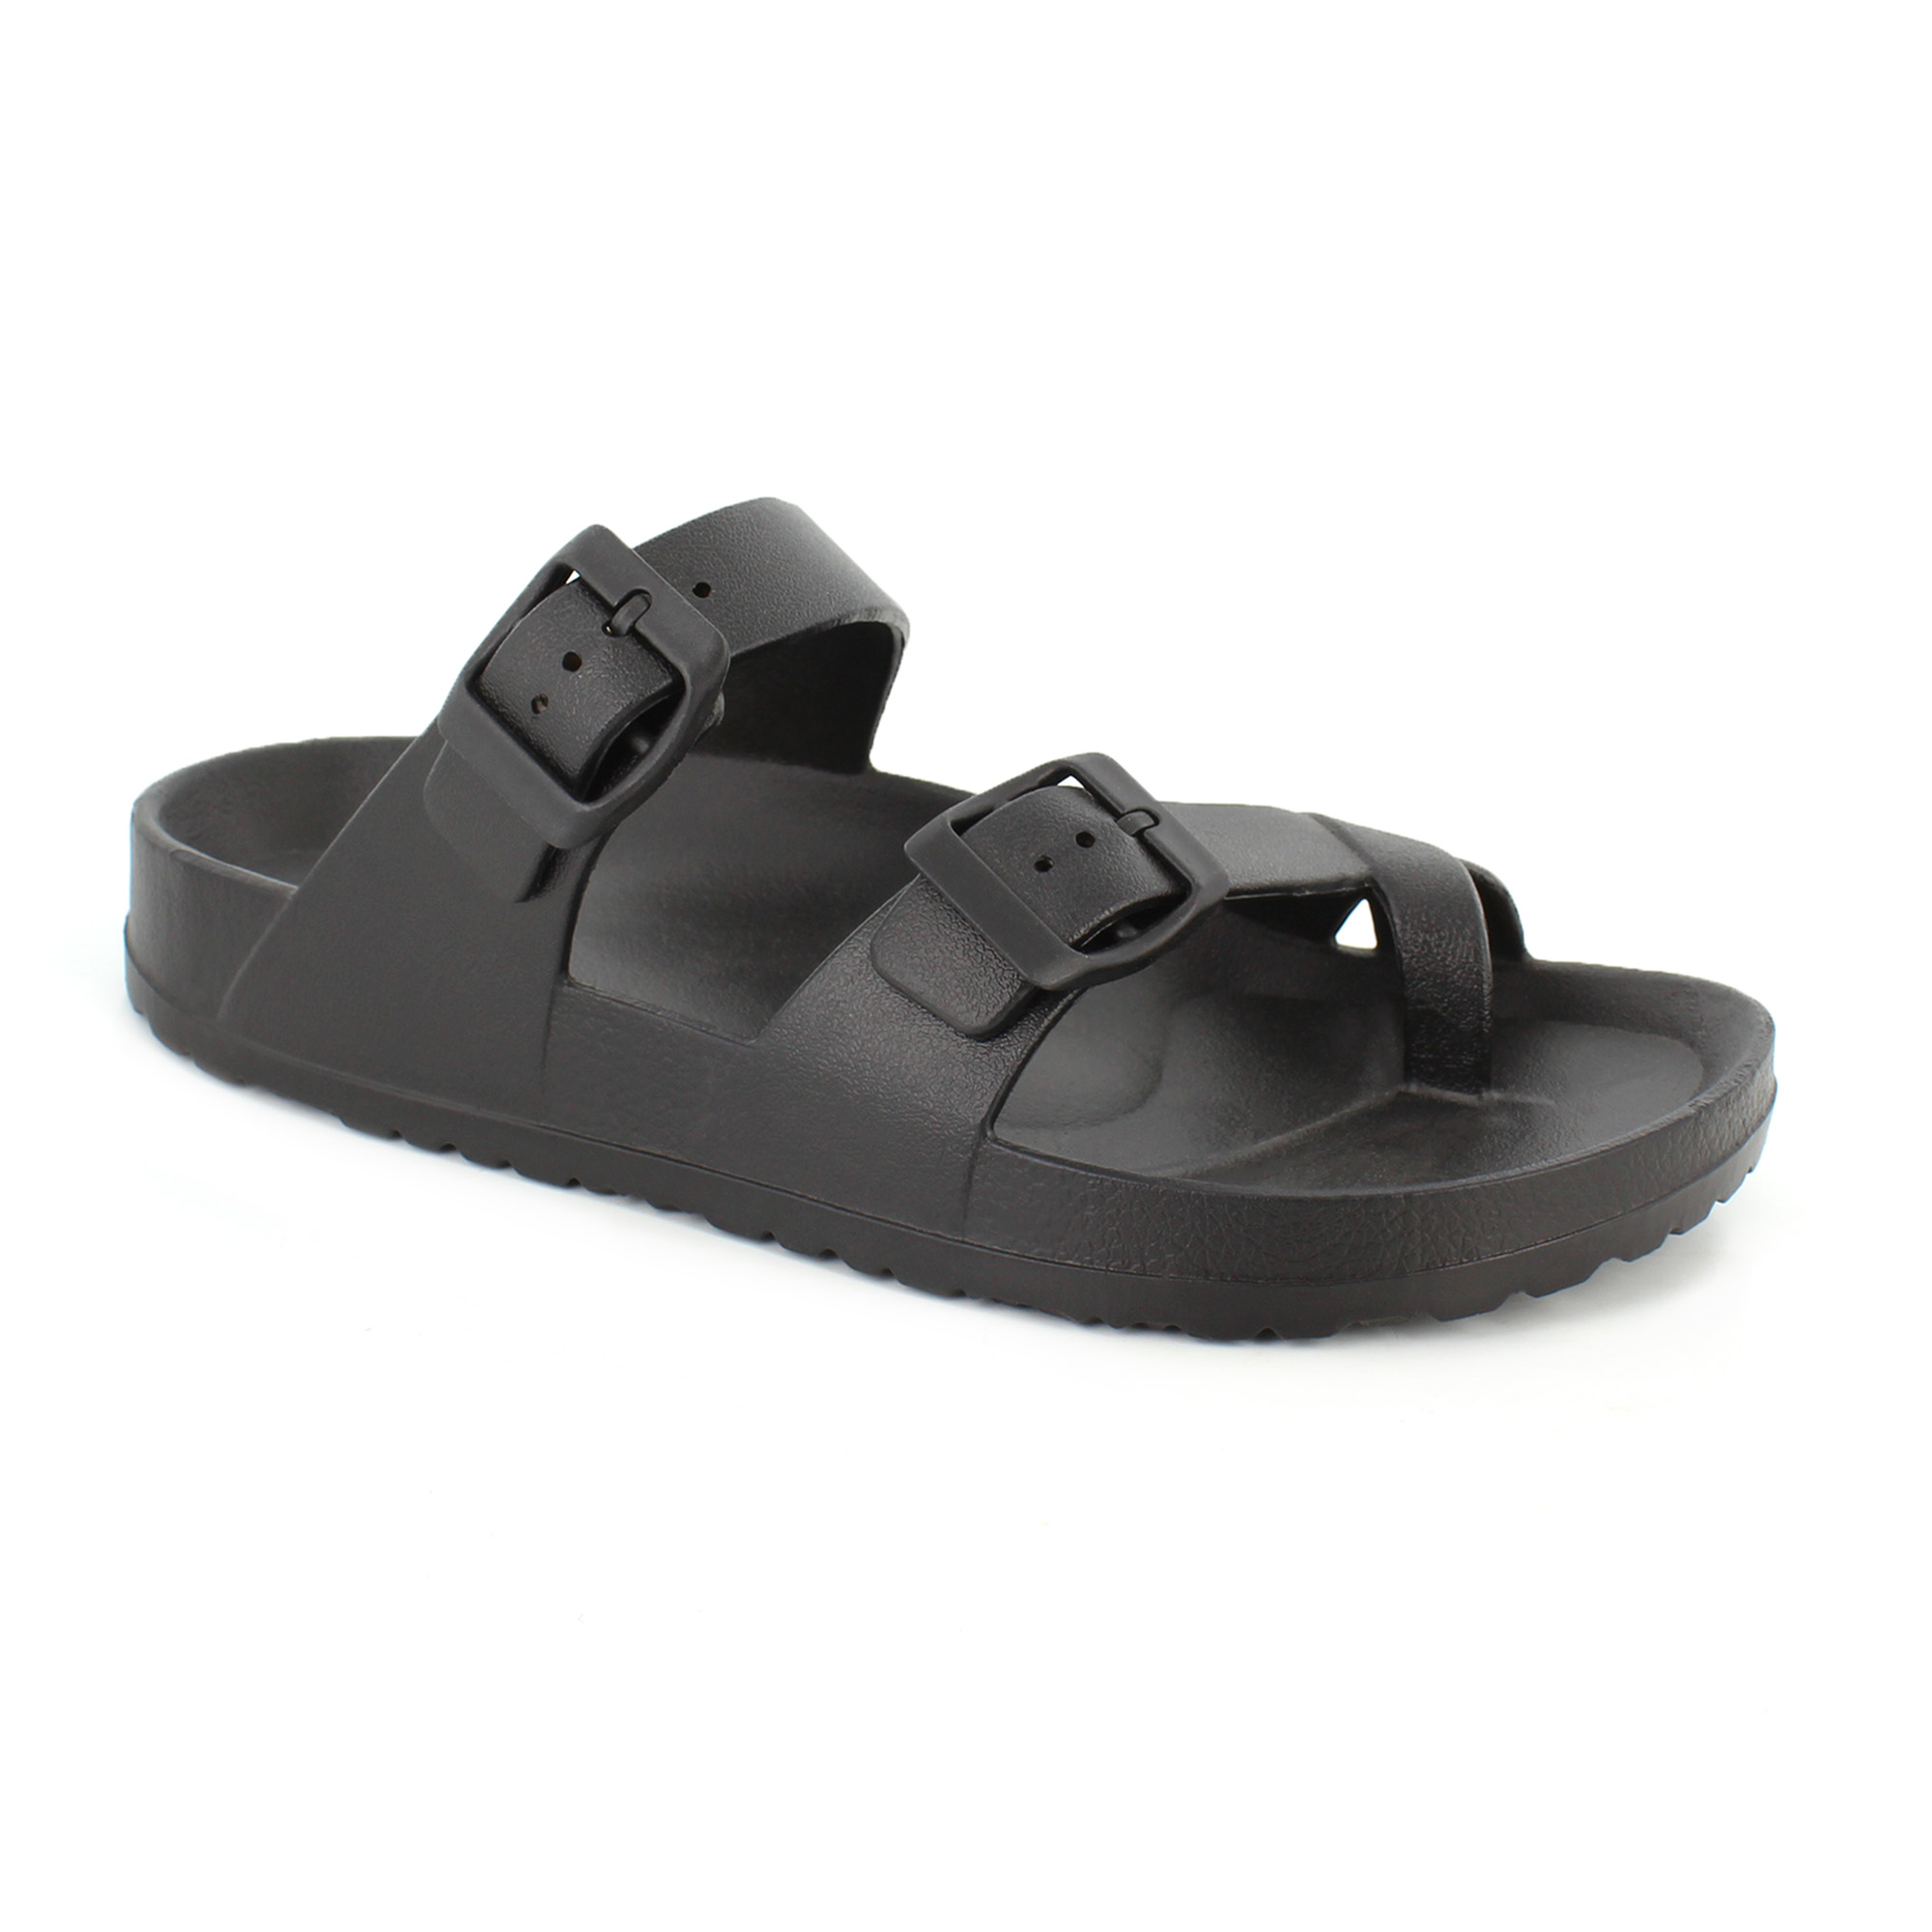 Aloha island sandals with toe strap all rubber - Sandal Design